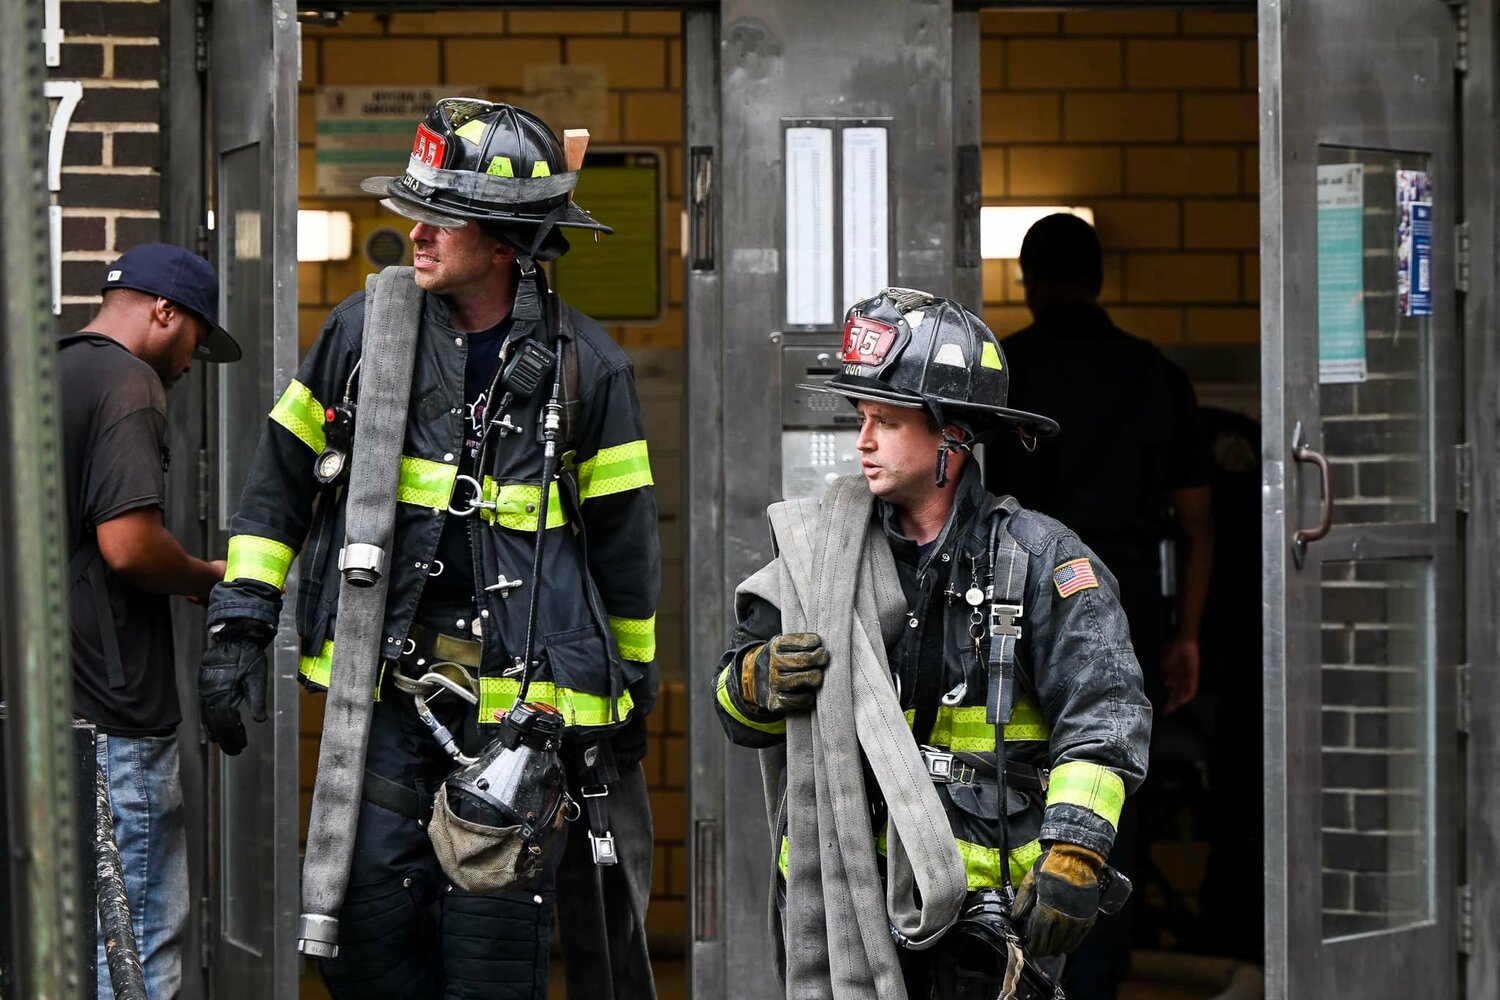 Firefighters at the scene of a 3-alarm fire on 1471 Watson Ave. in the Bronx’s Soundview neighborhood in August. The FDNY, firefighters and their unions have chastised the city’s Department of Citywide Administrative Services for its mishandling of the December 2022 promotion exam to fire lieutenant.